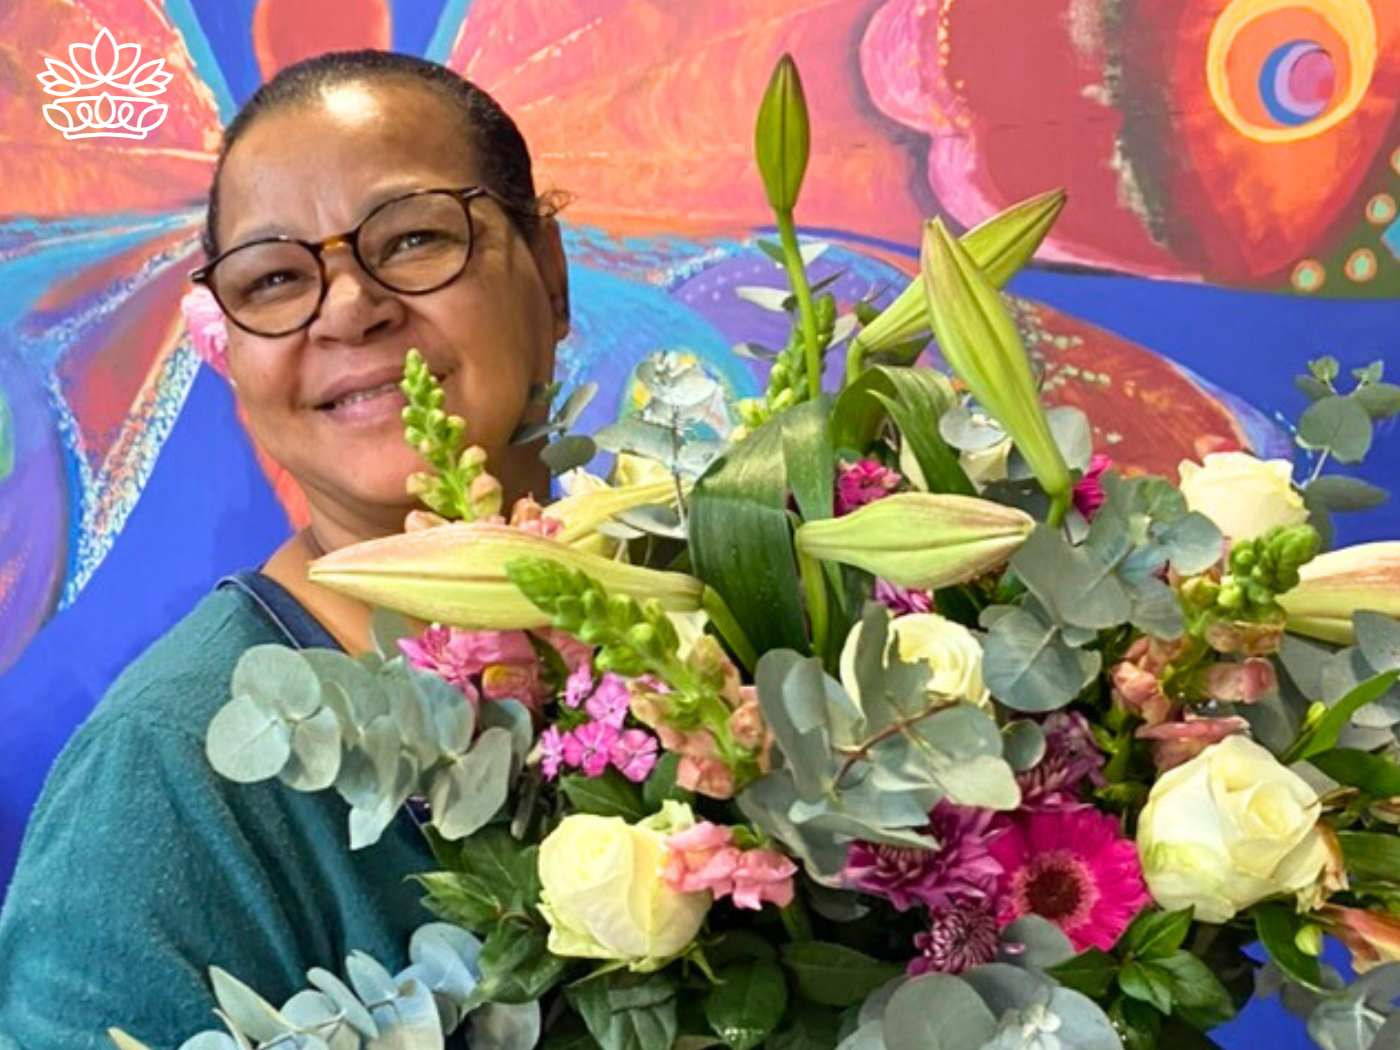 A delighted florist holding a pastel flower bouquet for secretaries delivery featuring white roses, pink snapdragons, and green eucalyptus leaves, complemented by vibrant artistic mural backdrop, from the Flowers By Occasion Collection at Fabulous Flowers and Gifts.